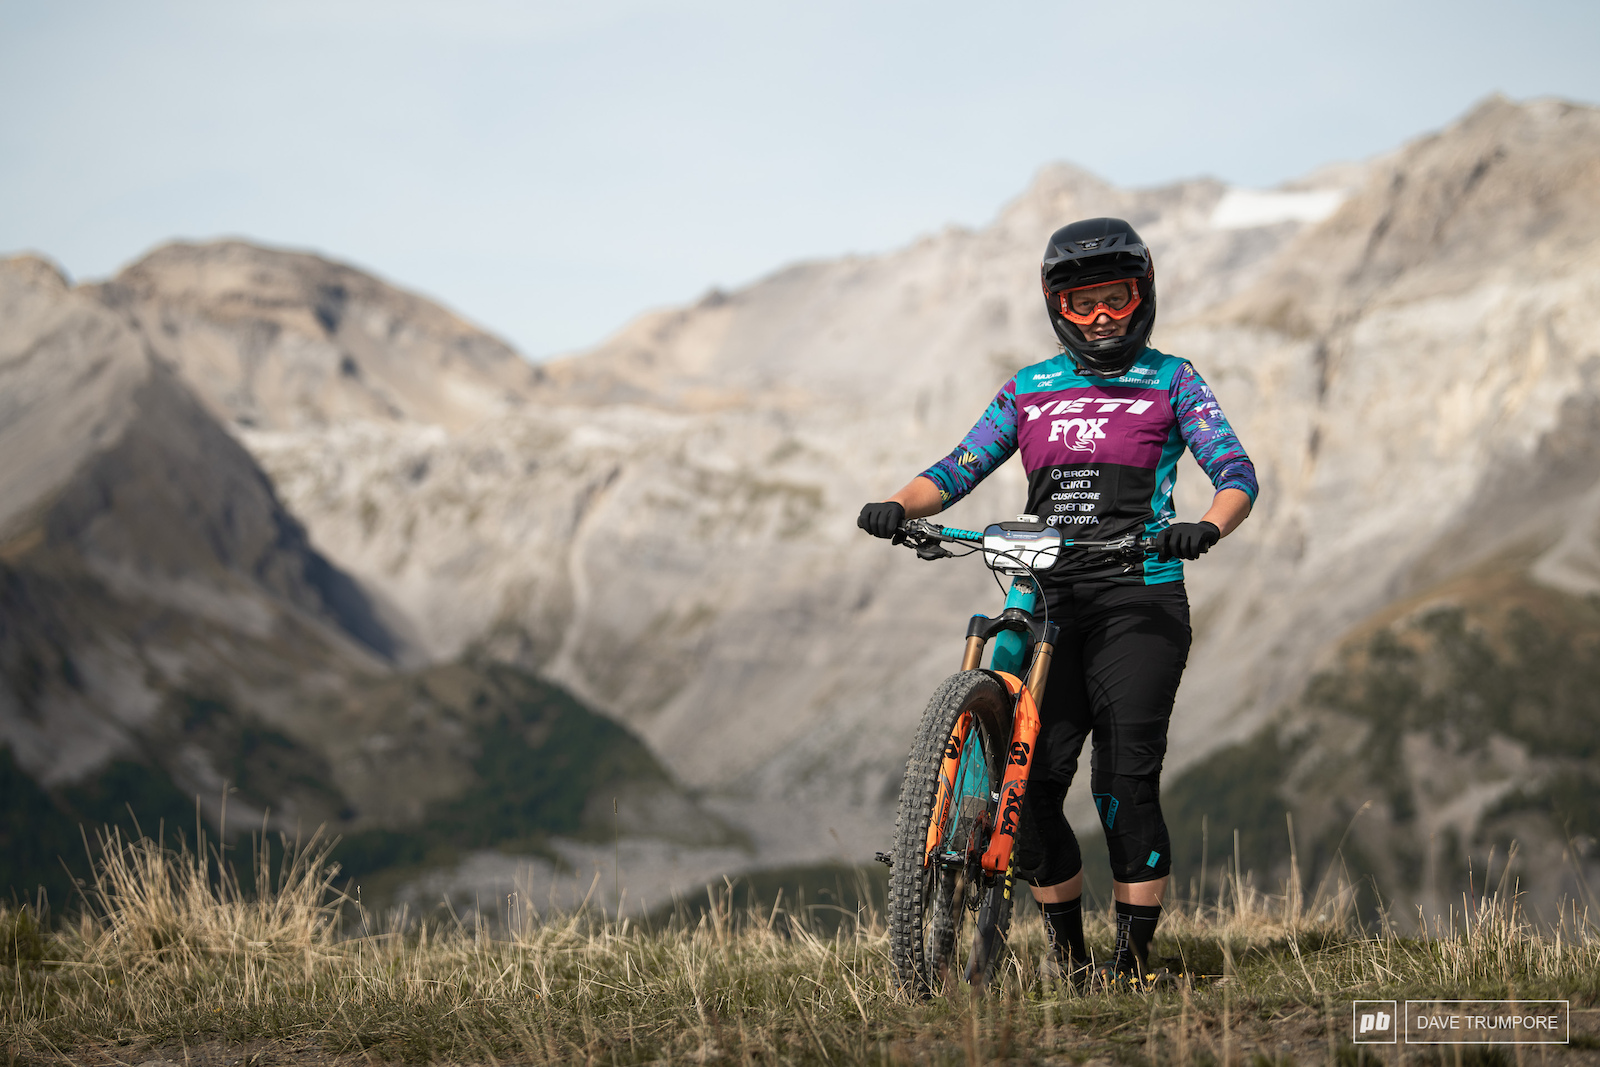 Bex Baraona was happy to show off her new race kit but less obliged to do the same with her new Yeti SB race bike.